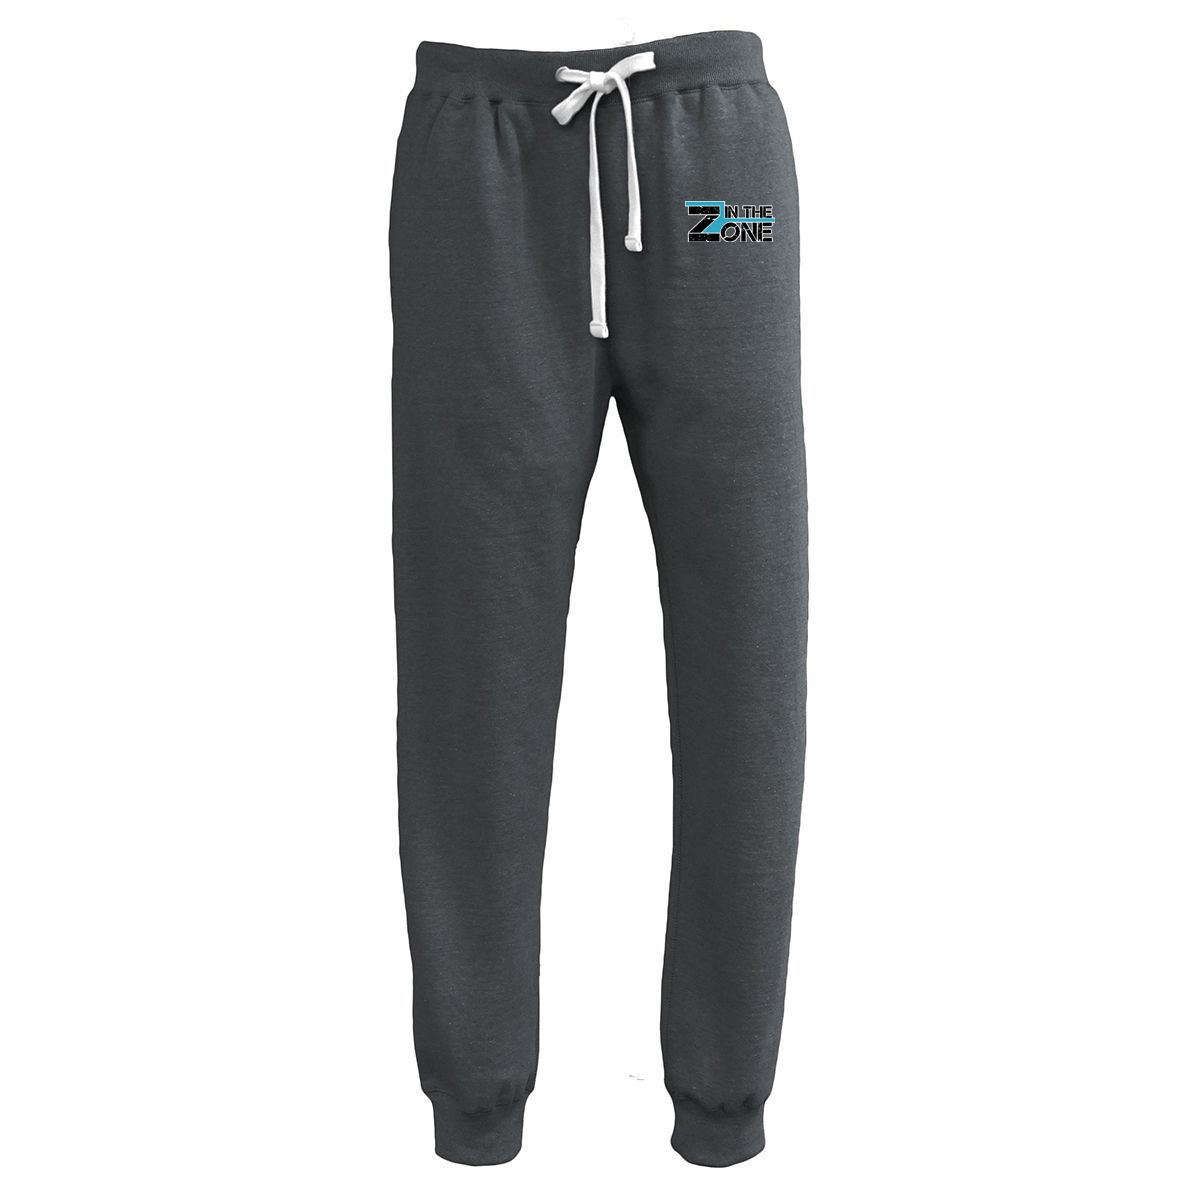 The Zone Joggers